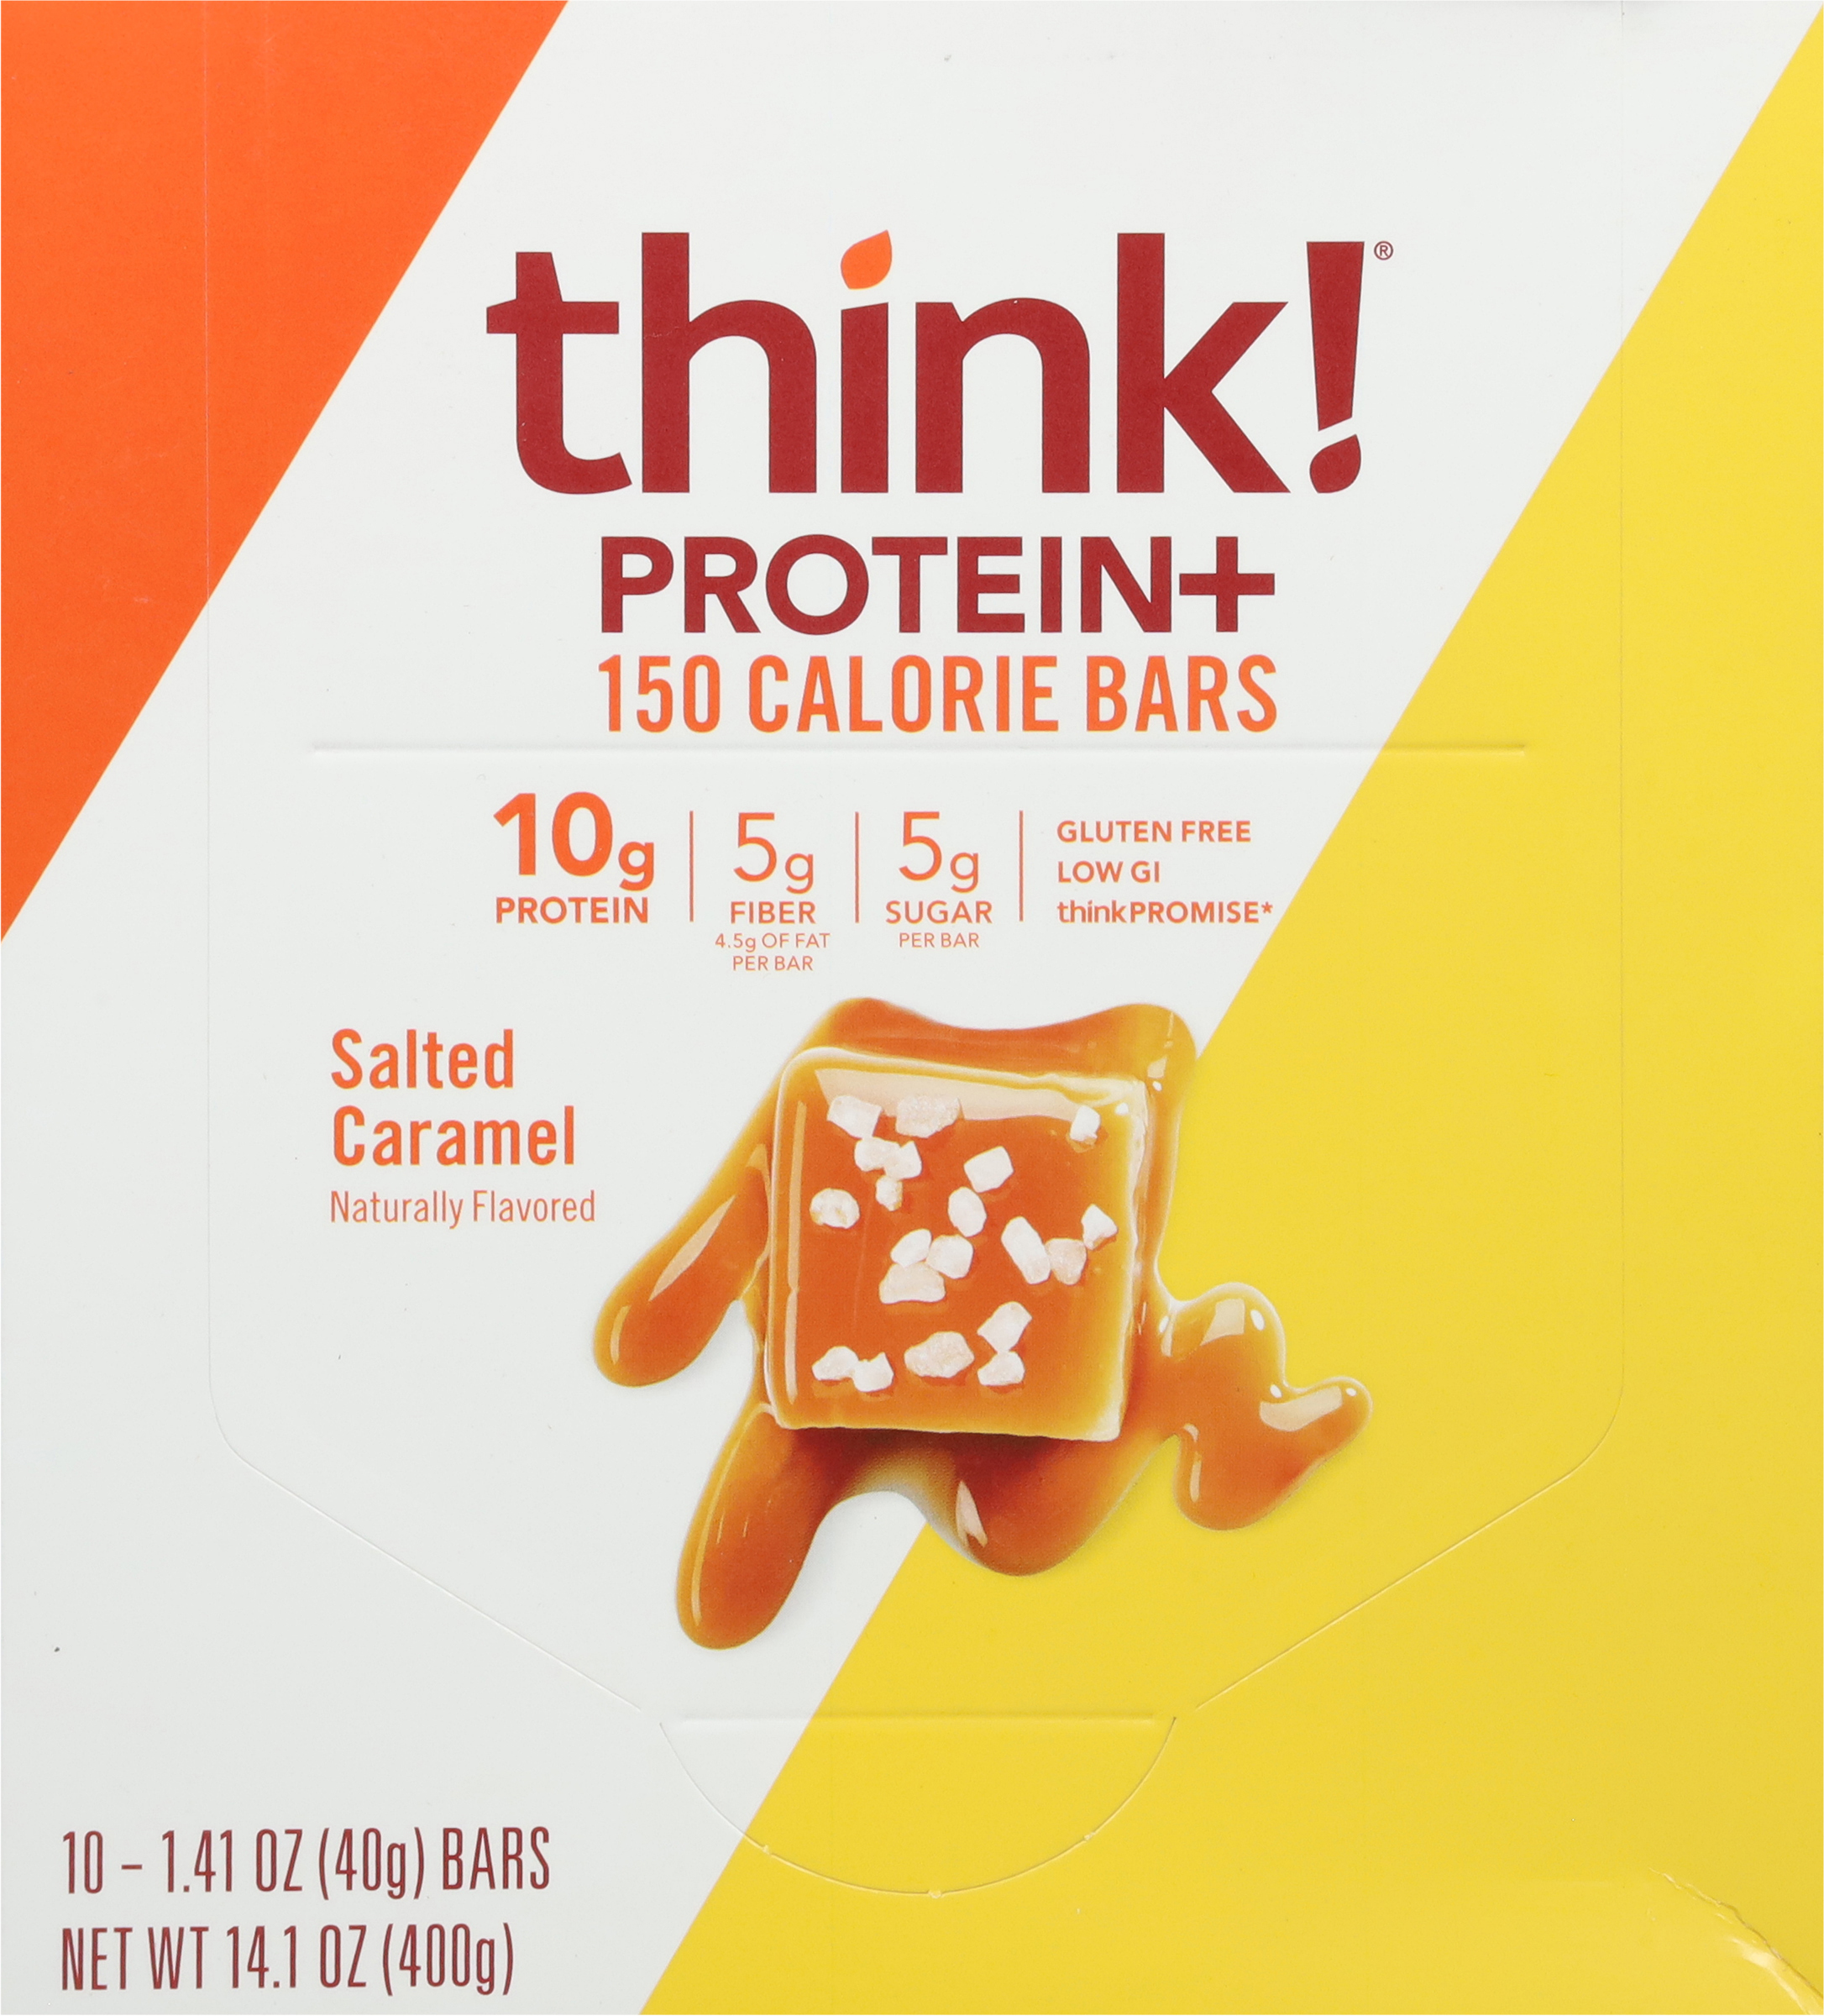 150 Calorie Bars, Salted Caramel, Protein+ image